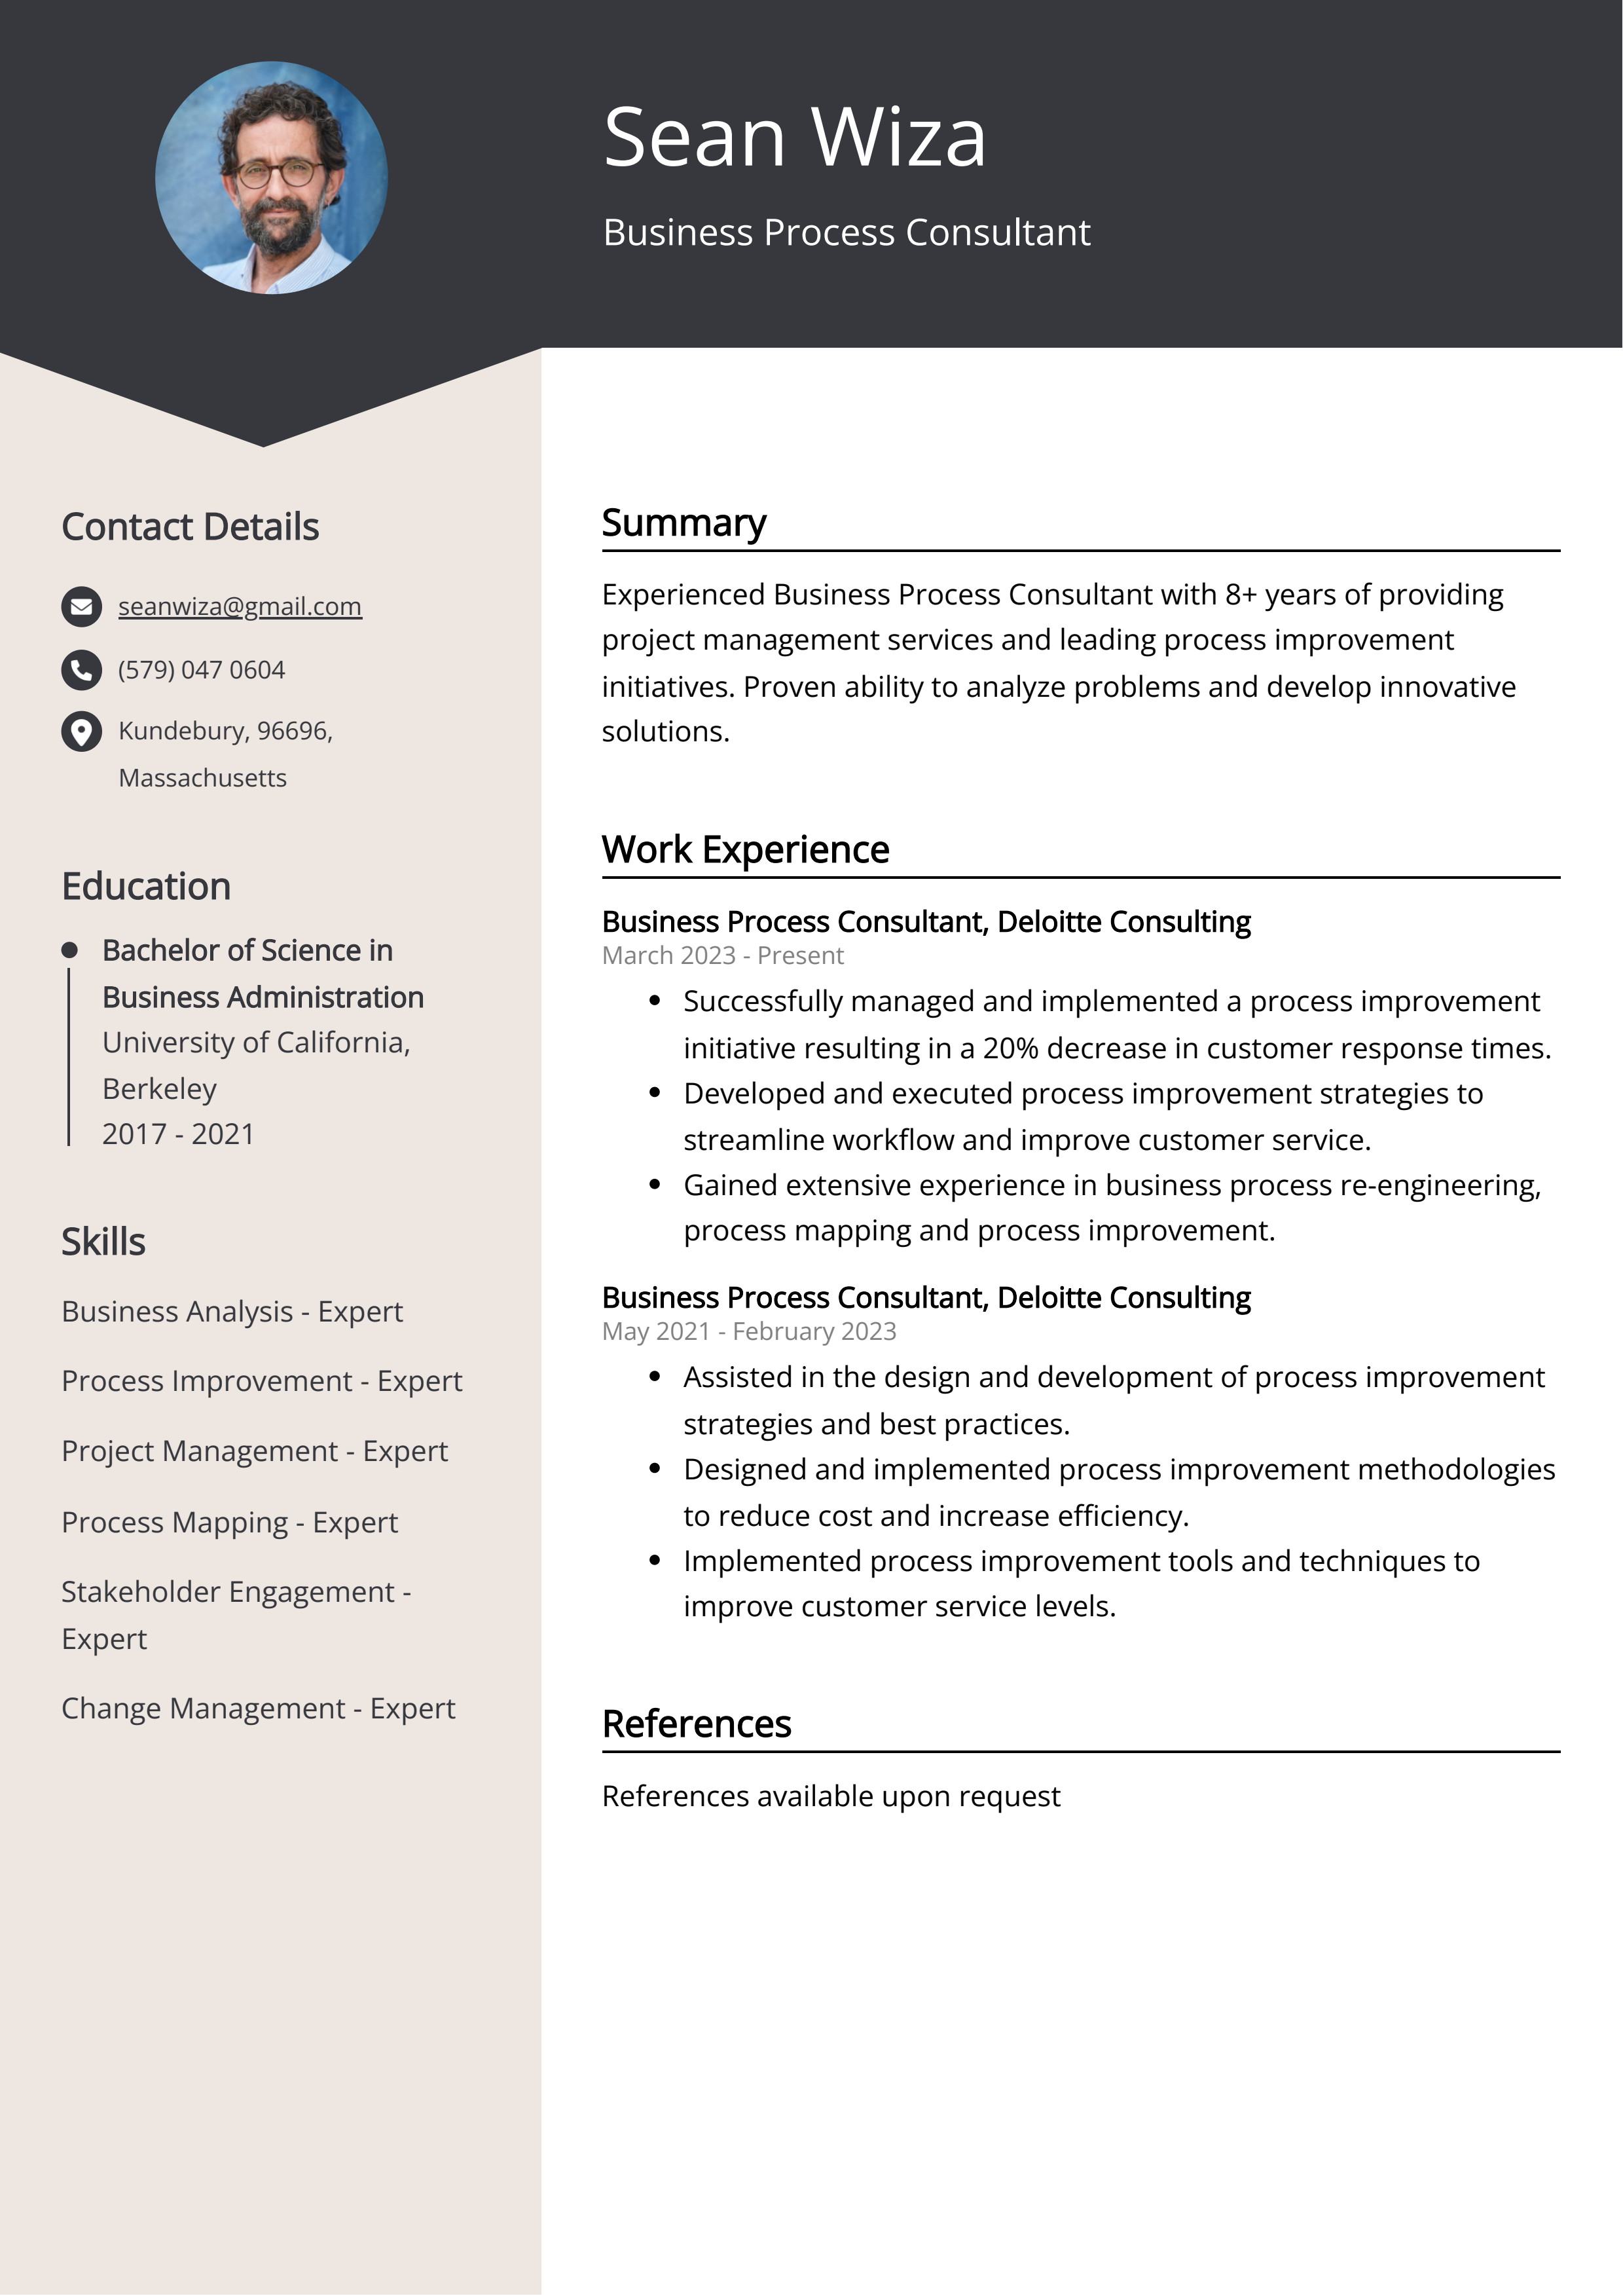 Business Process Consultant CV Example